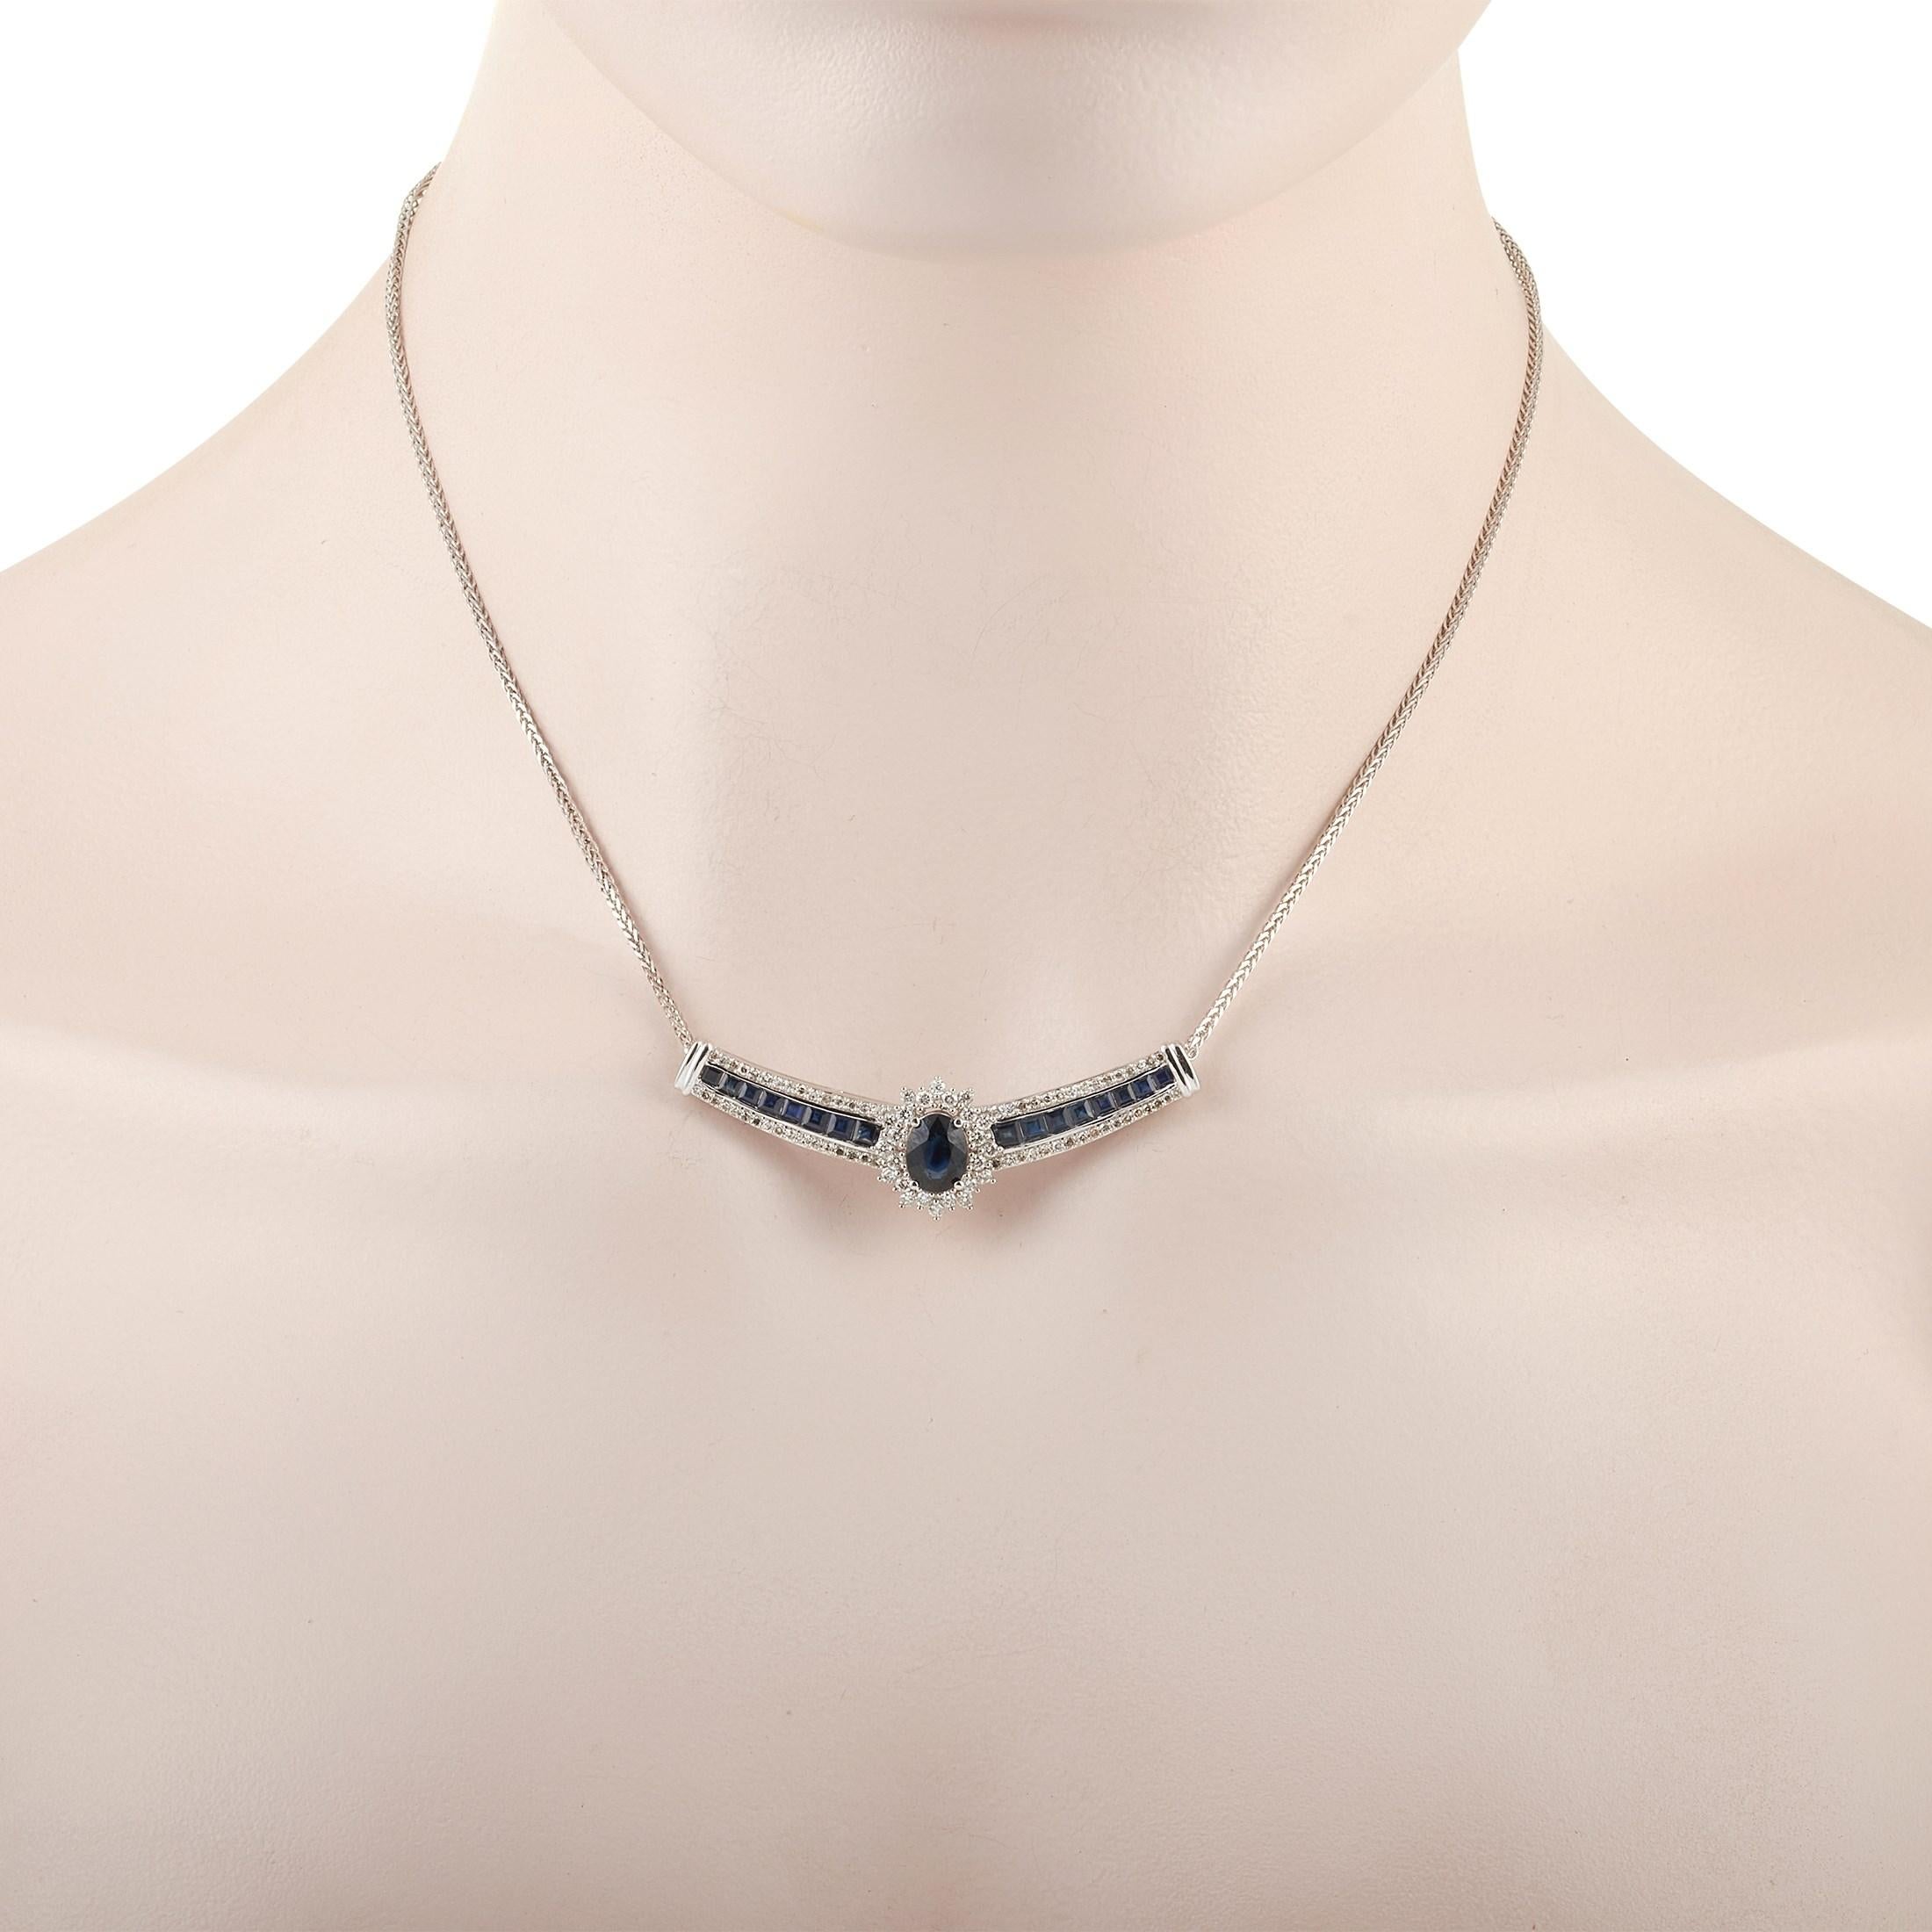 This LB Exclusive 14K White Gold 0.75 ct Diamond and 3 ct Sapphire Necklace features a delicate 14K White Gold chain measuring 15 inches in length. The necklace features a matching 14K White Gold Bar style Pendant set with 0.75 carats of round-cut